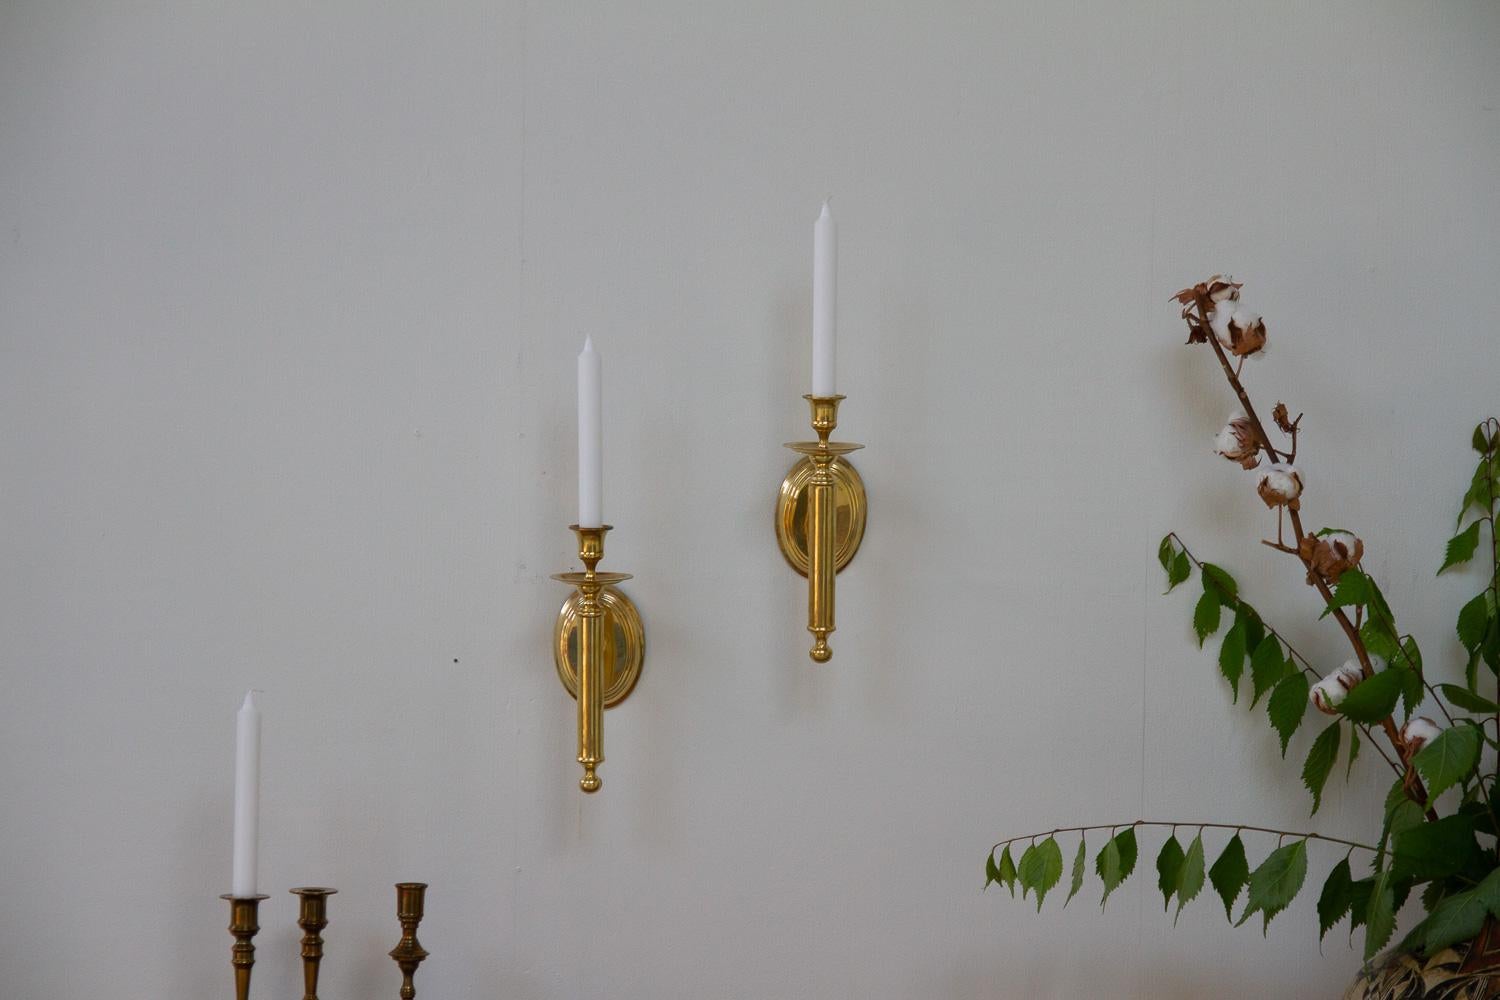 Vintage Danish Brass Candle Sconces, 1950s. Set of 2.
Pair of elegant Danish wall mounted brass candleholders from the mid 20th century. 
Very good original condition.